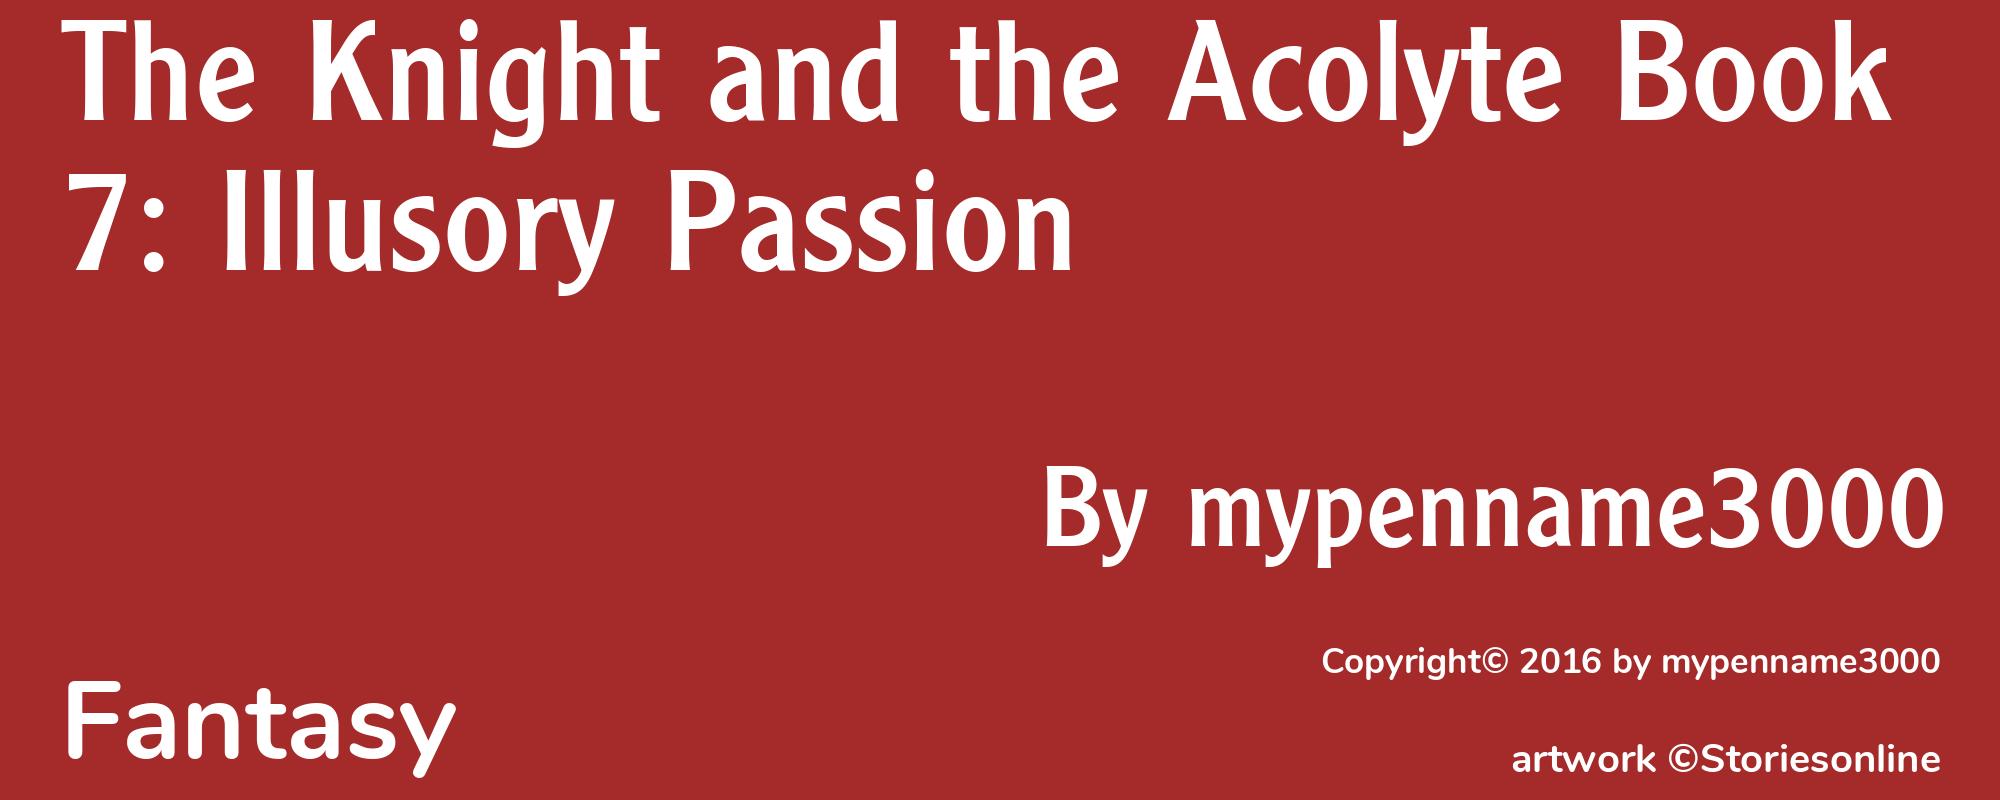 The Knight and the Acolyte Book 7: Illusory Passion - Cover